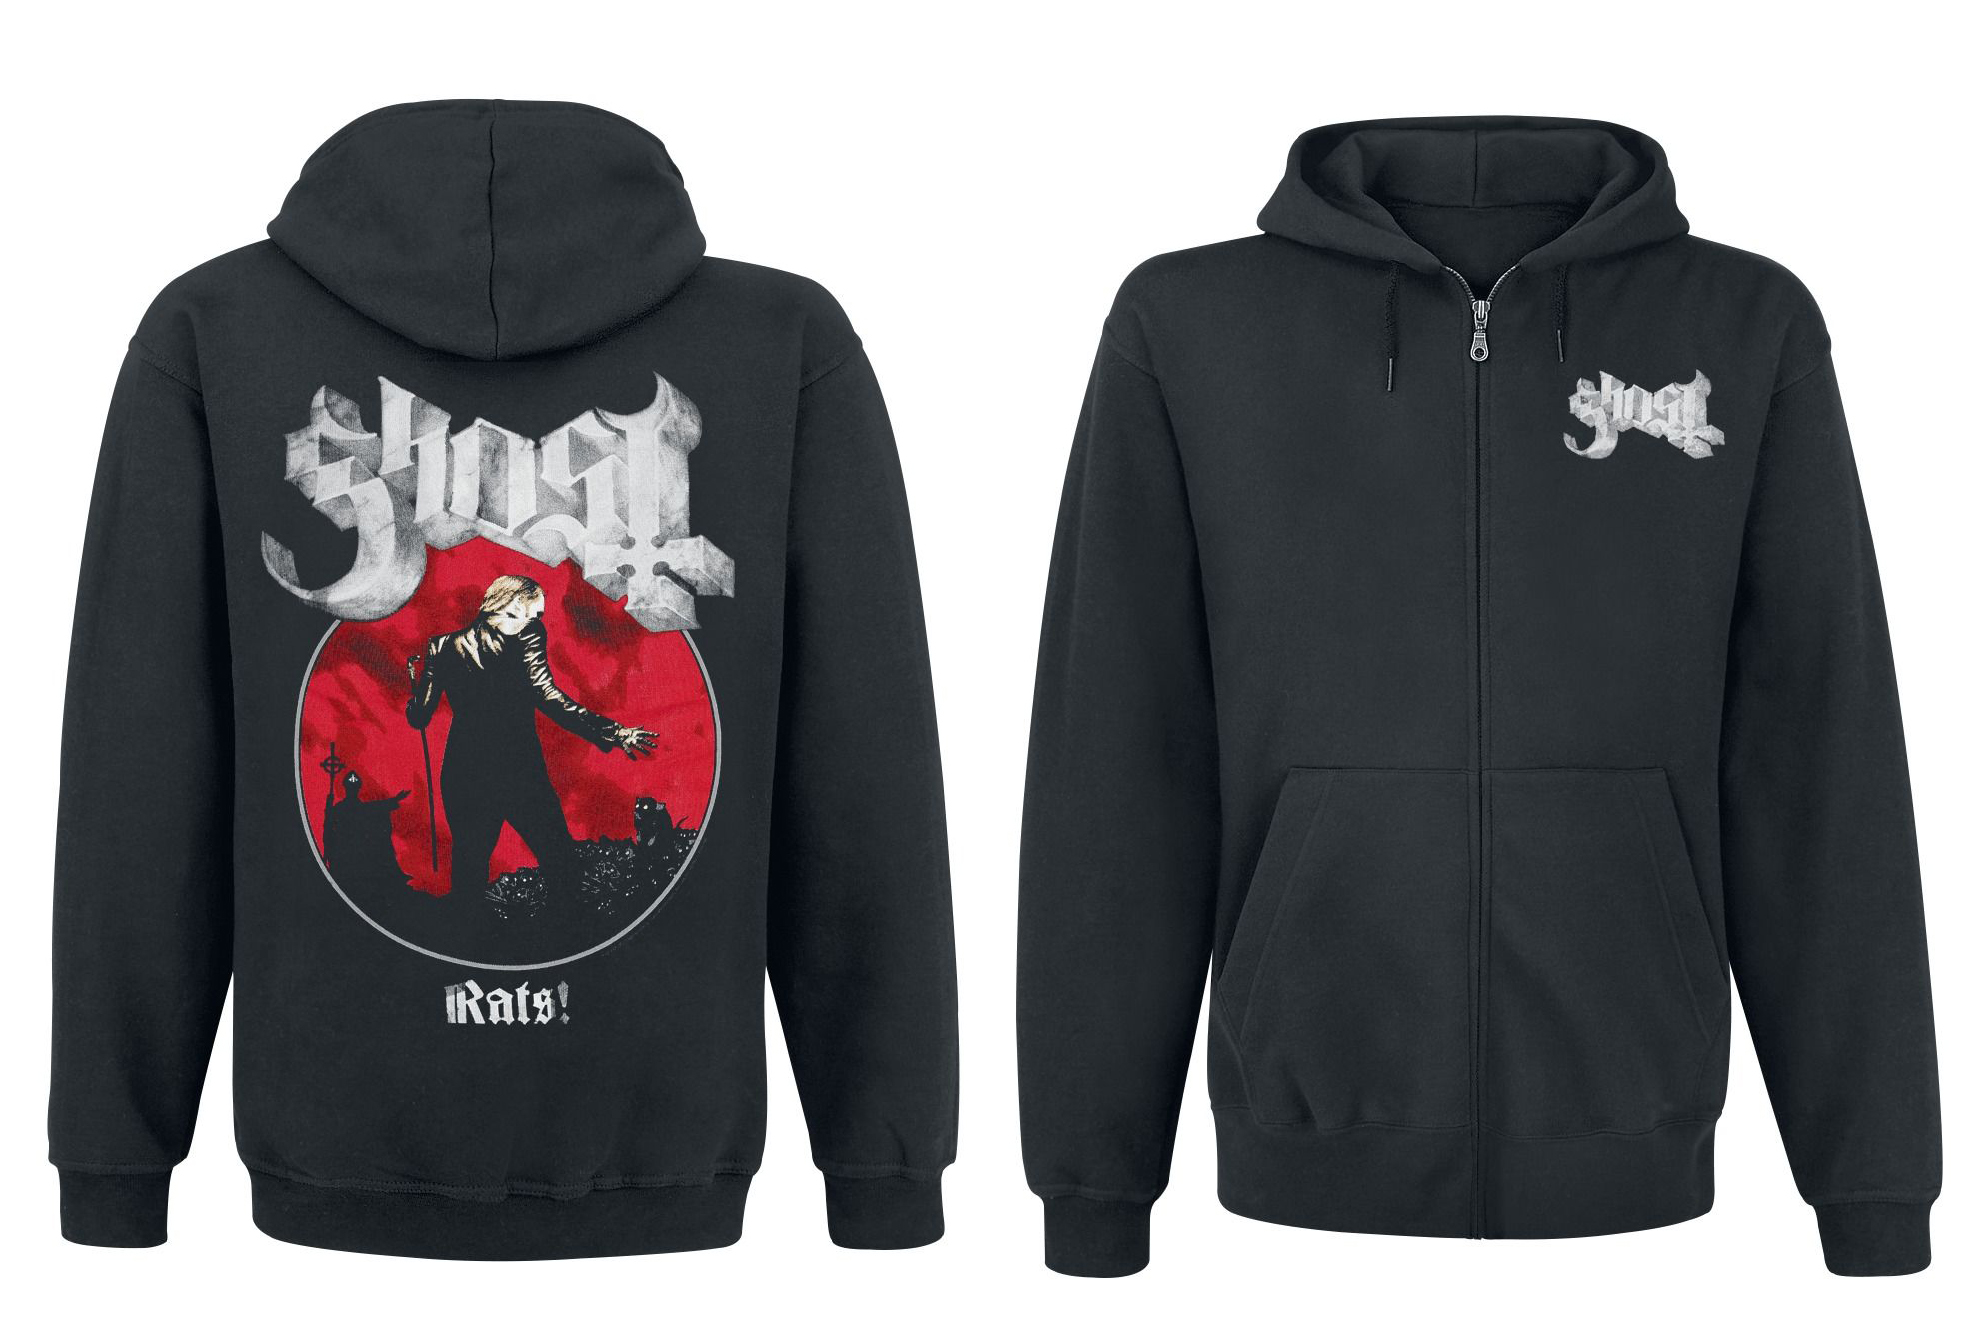   GHOST | Rats! On The Road 2018 admat hoodie    official tour image and marble logo   Acrylic on paper and digital 